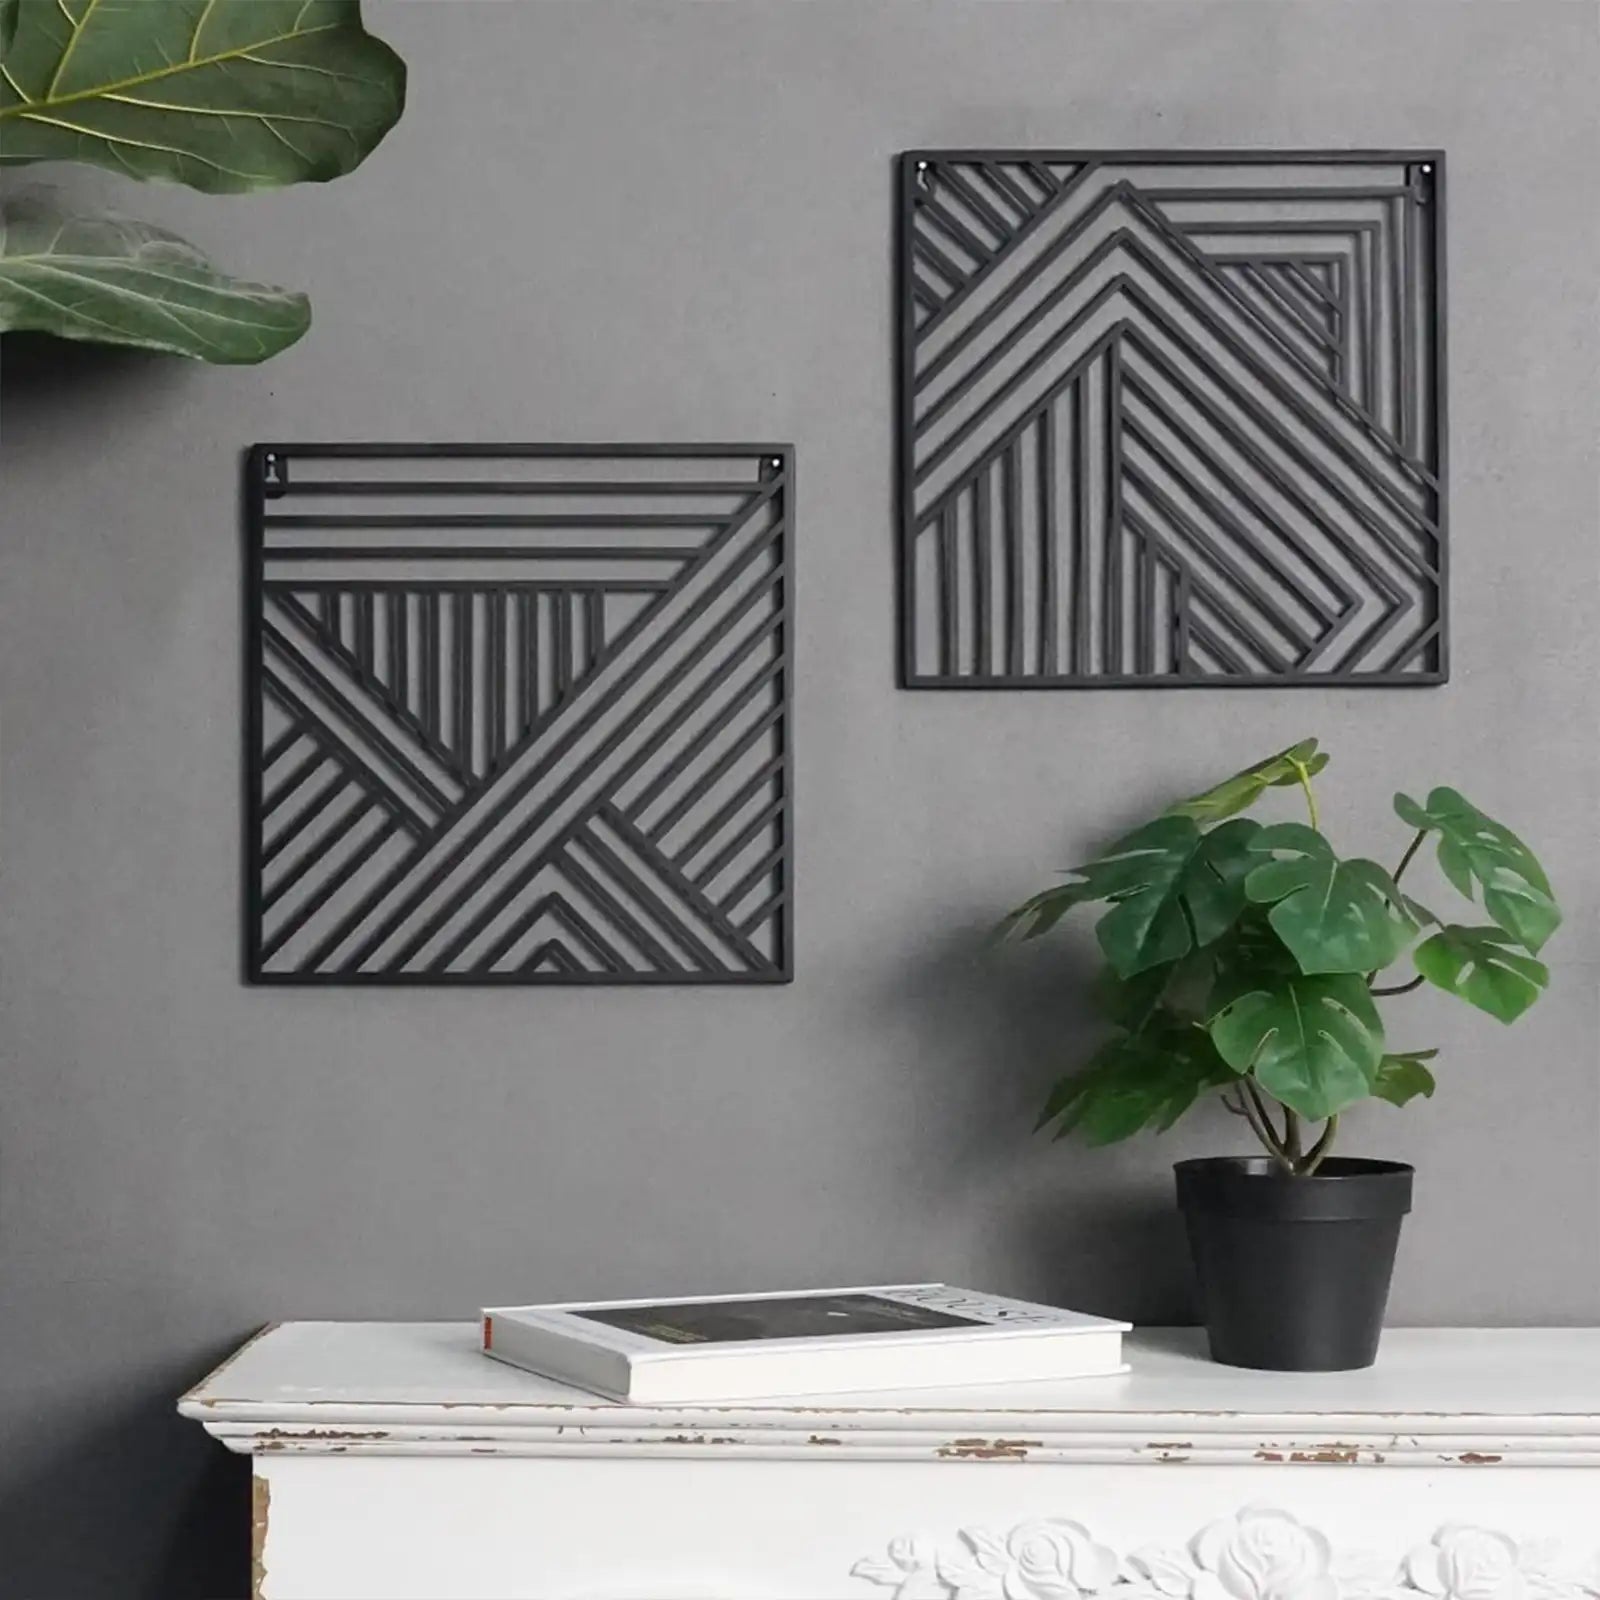 Black Geometric Line Metal Wall Art Set of 2, Minimalist Square Hanging Decoration, Modern Hanging Wall Sculpture over bed, 11.8x11.8 Inches